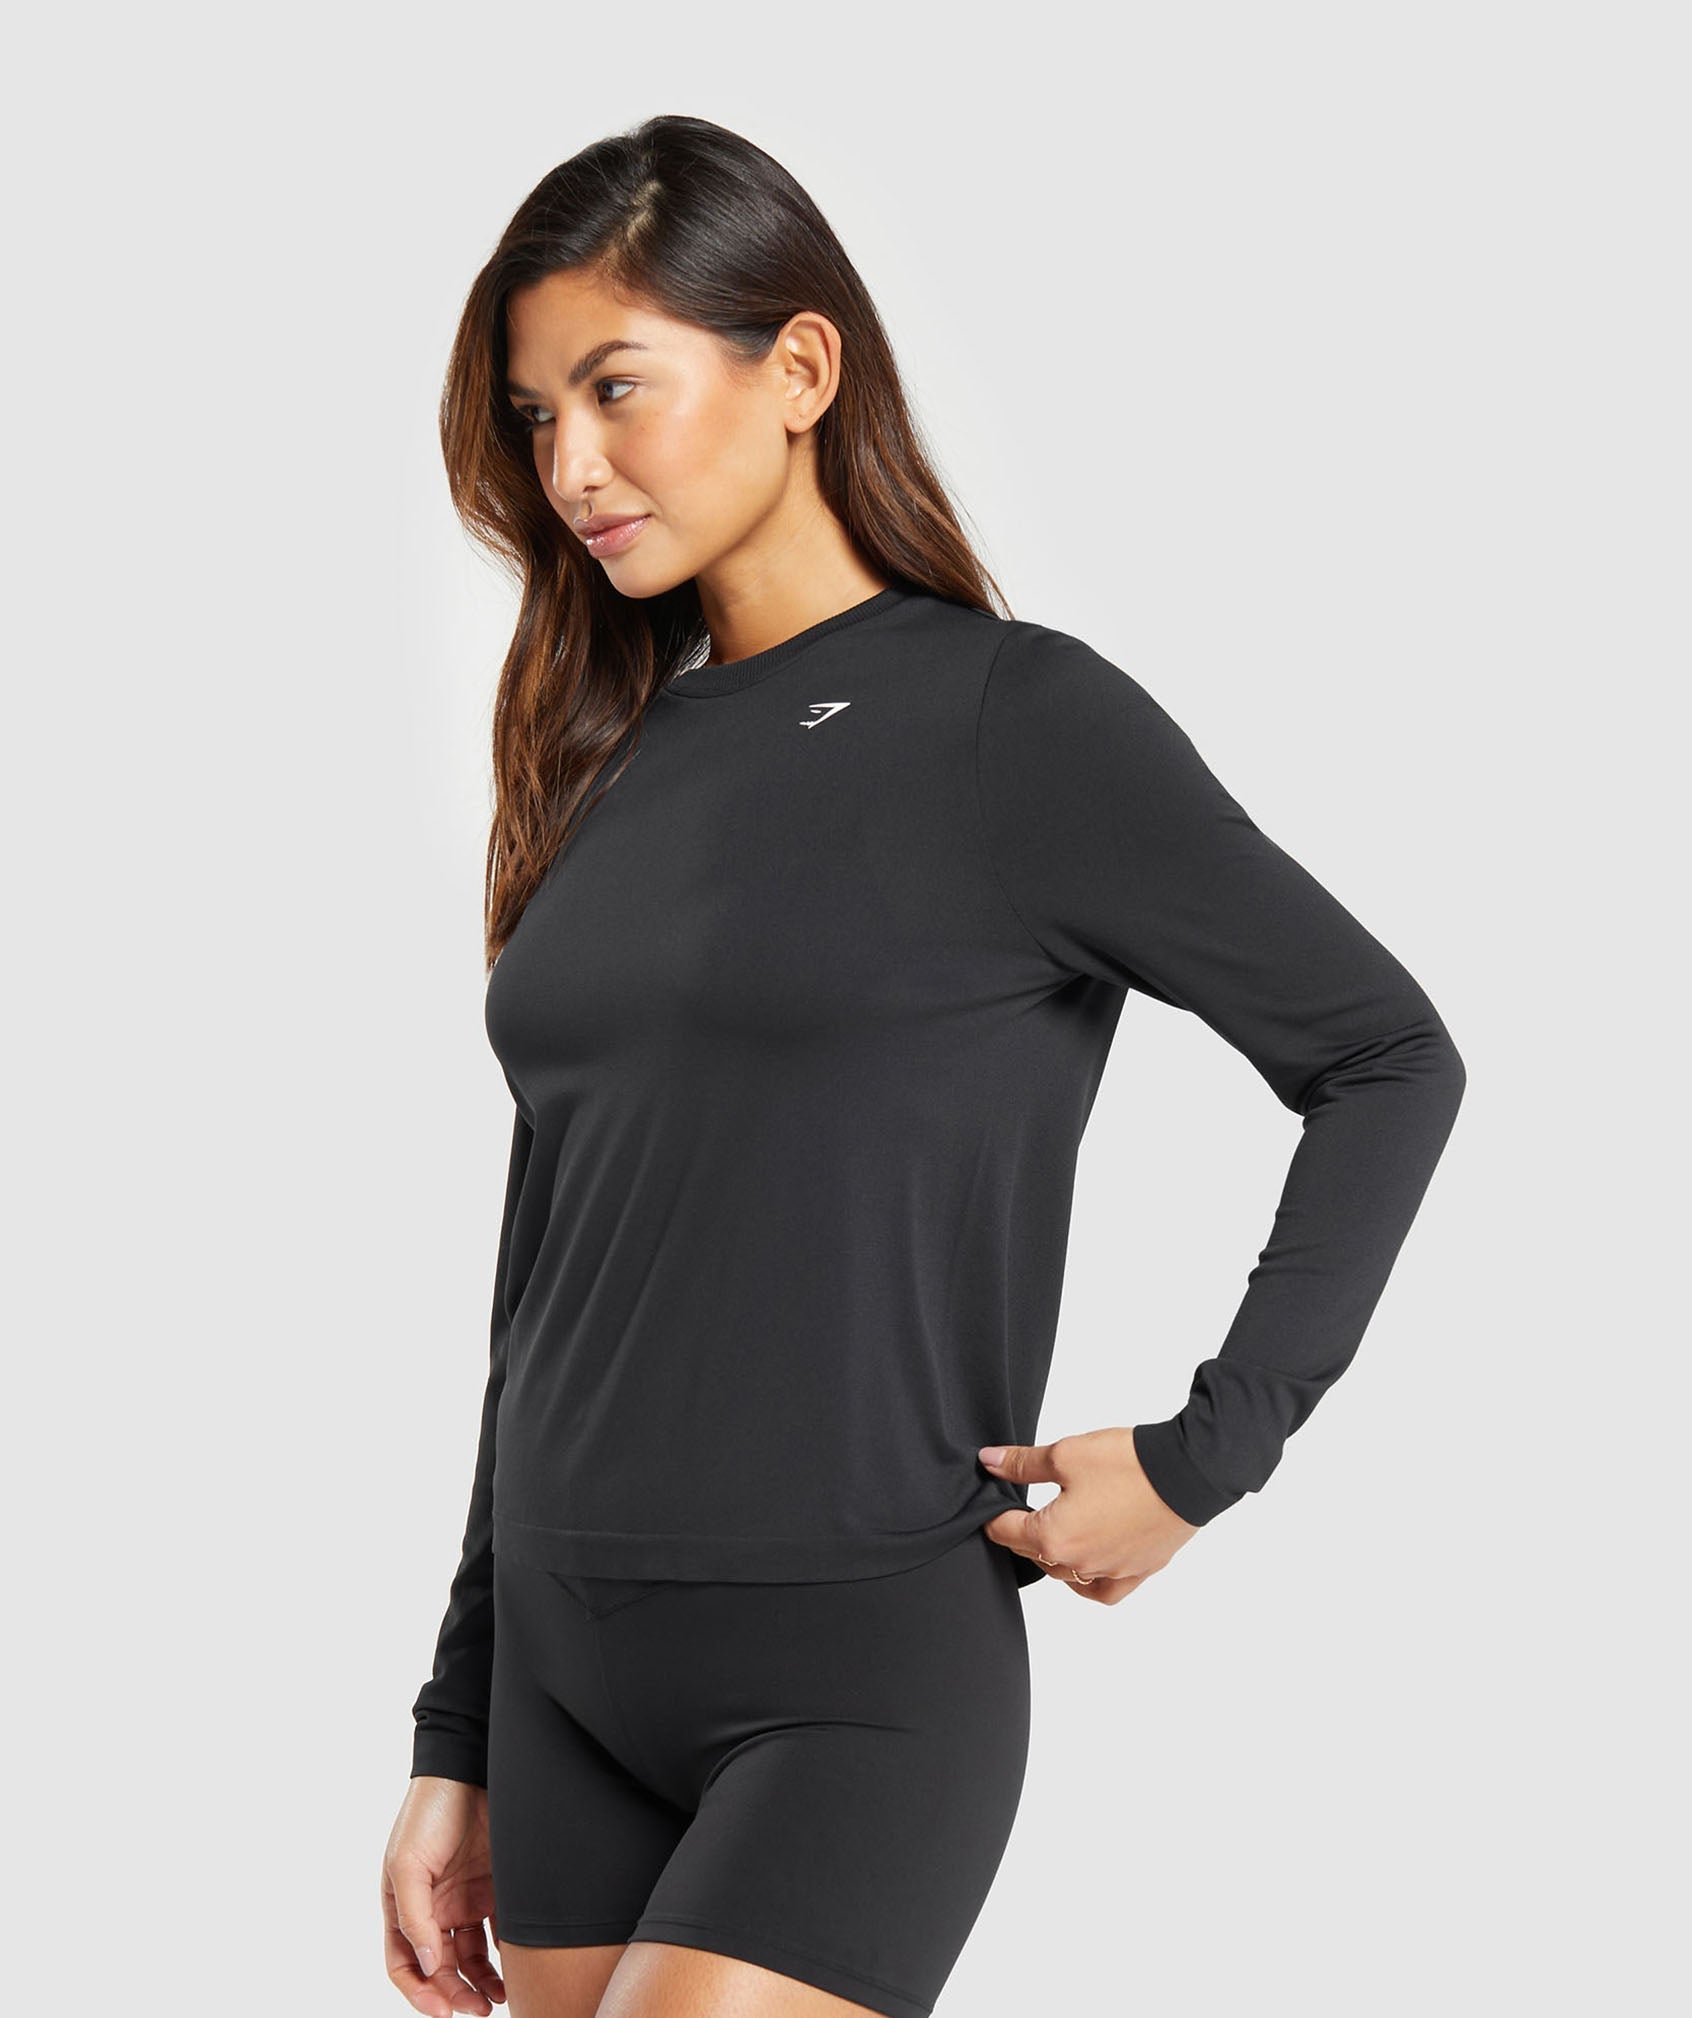 Everyday Seamless Long Sleeve Top in Black - view 6